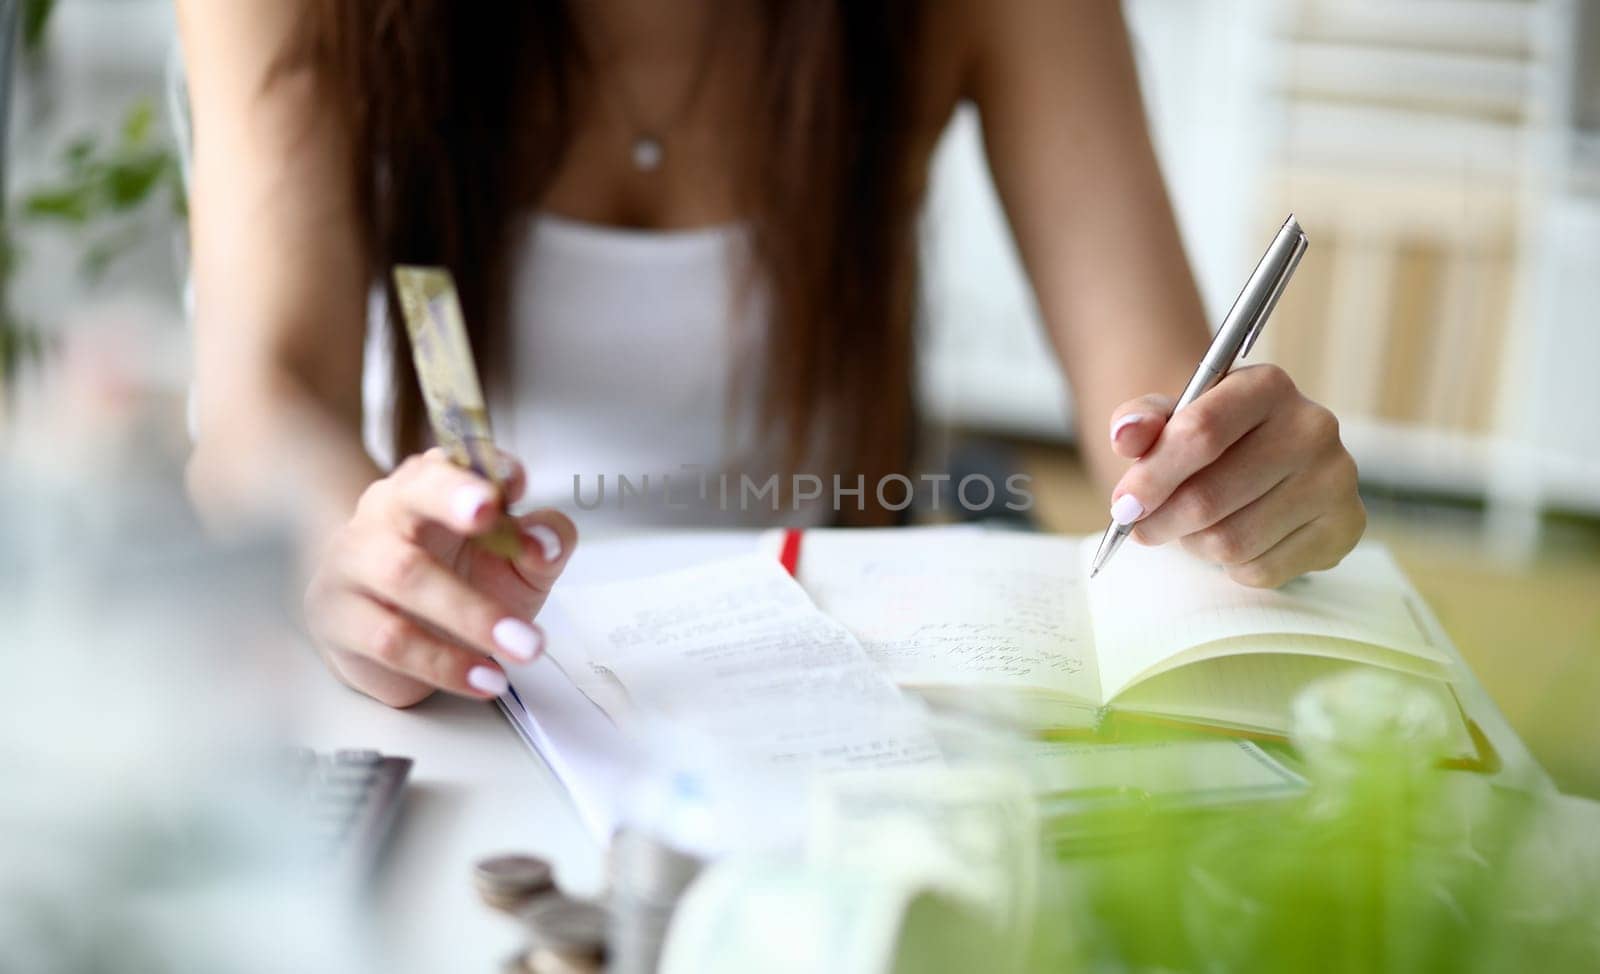 Focus on tender businesswoman hands holding metallic writing pen and counting important numbers in significant charts and graphs. Office concept. Blurred background